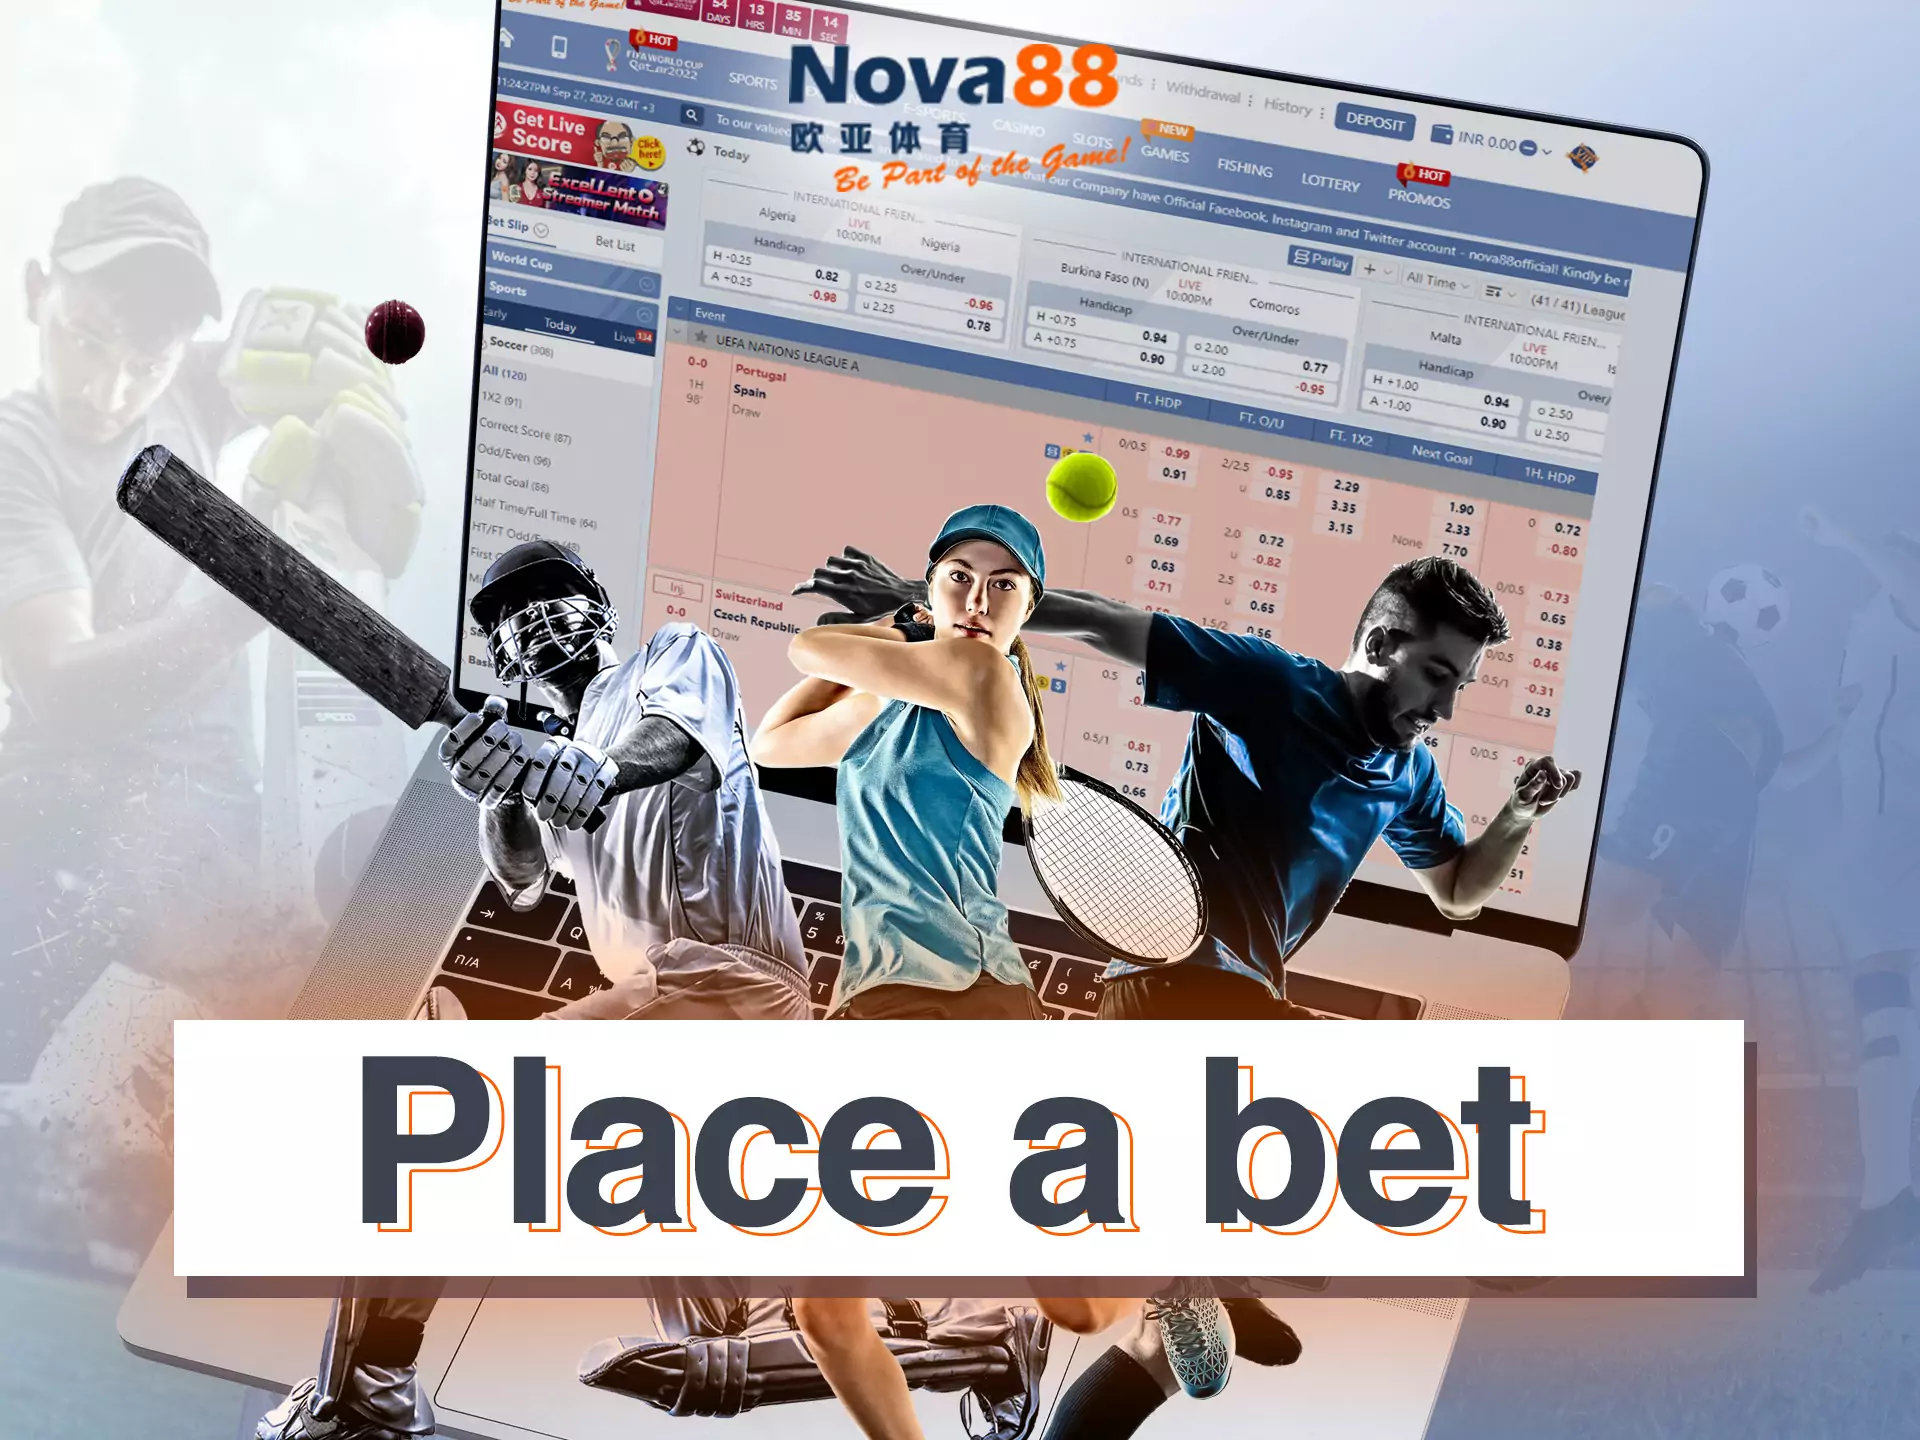 Choose a sports or esports match and place a bet on Nova88.